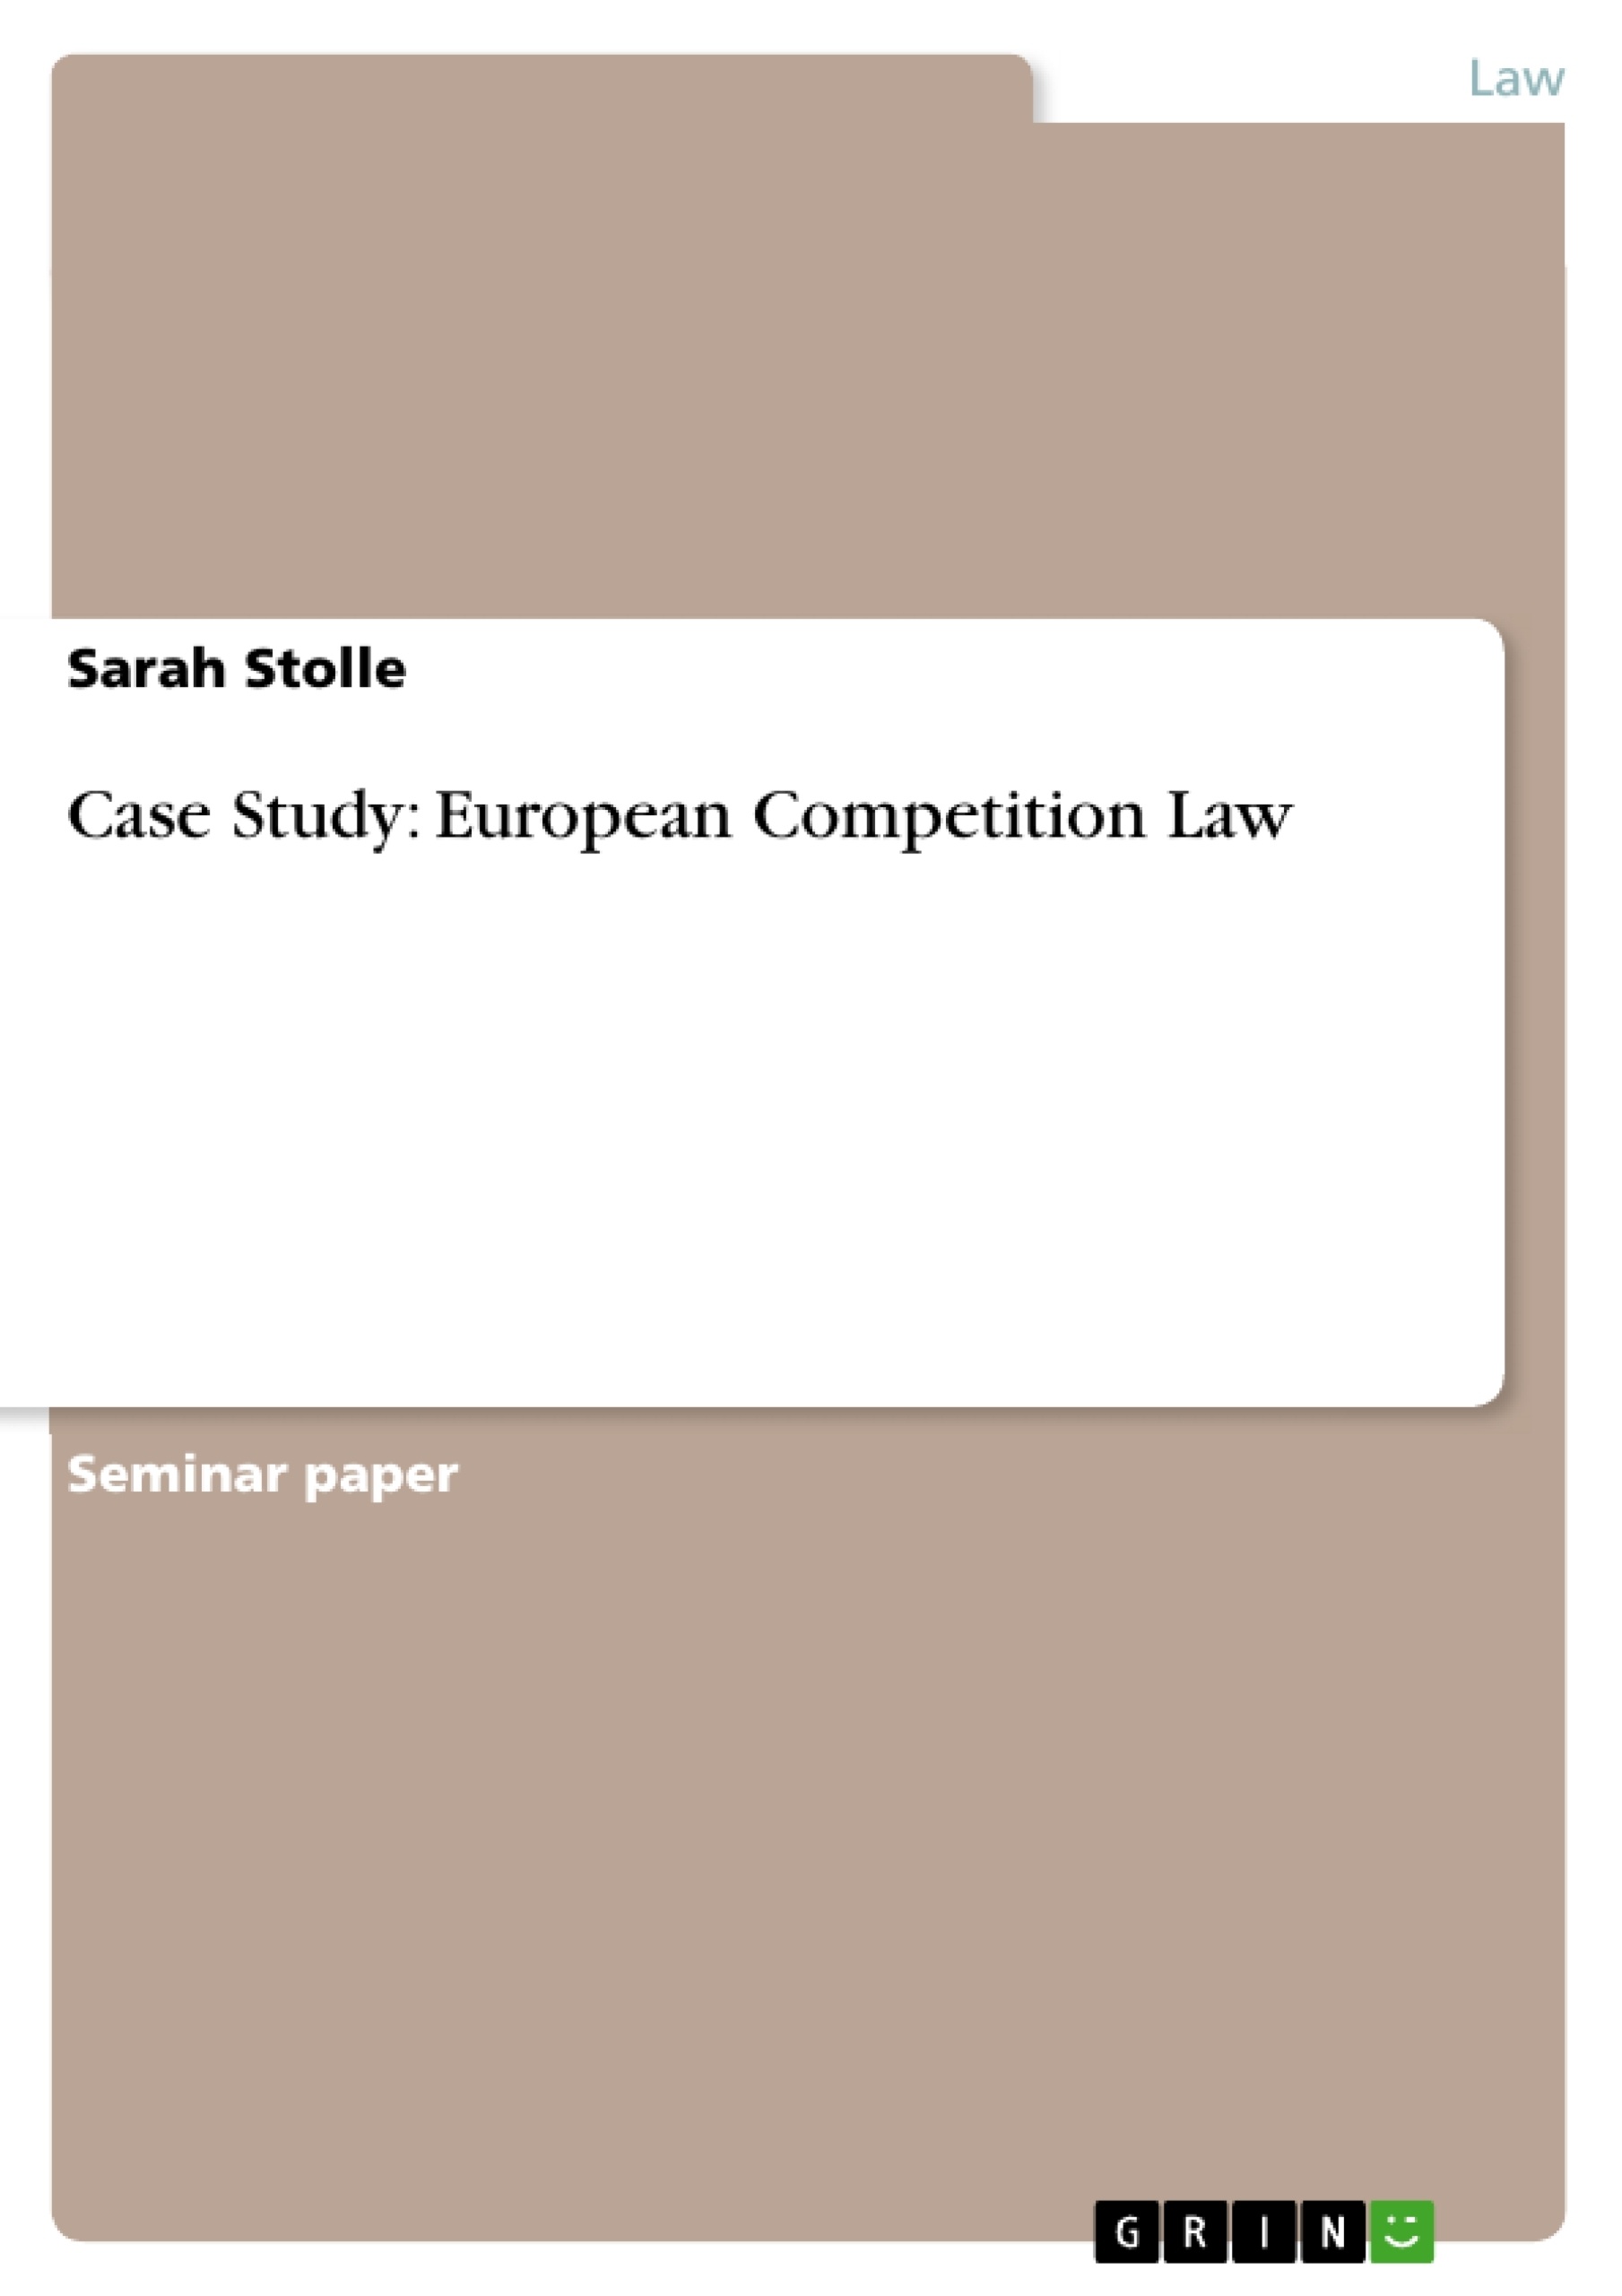 Master thesis european competition law